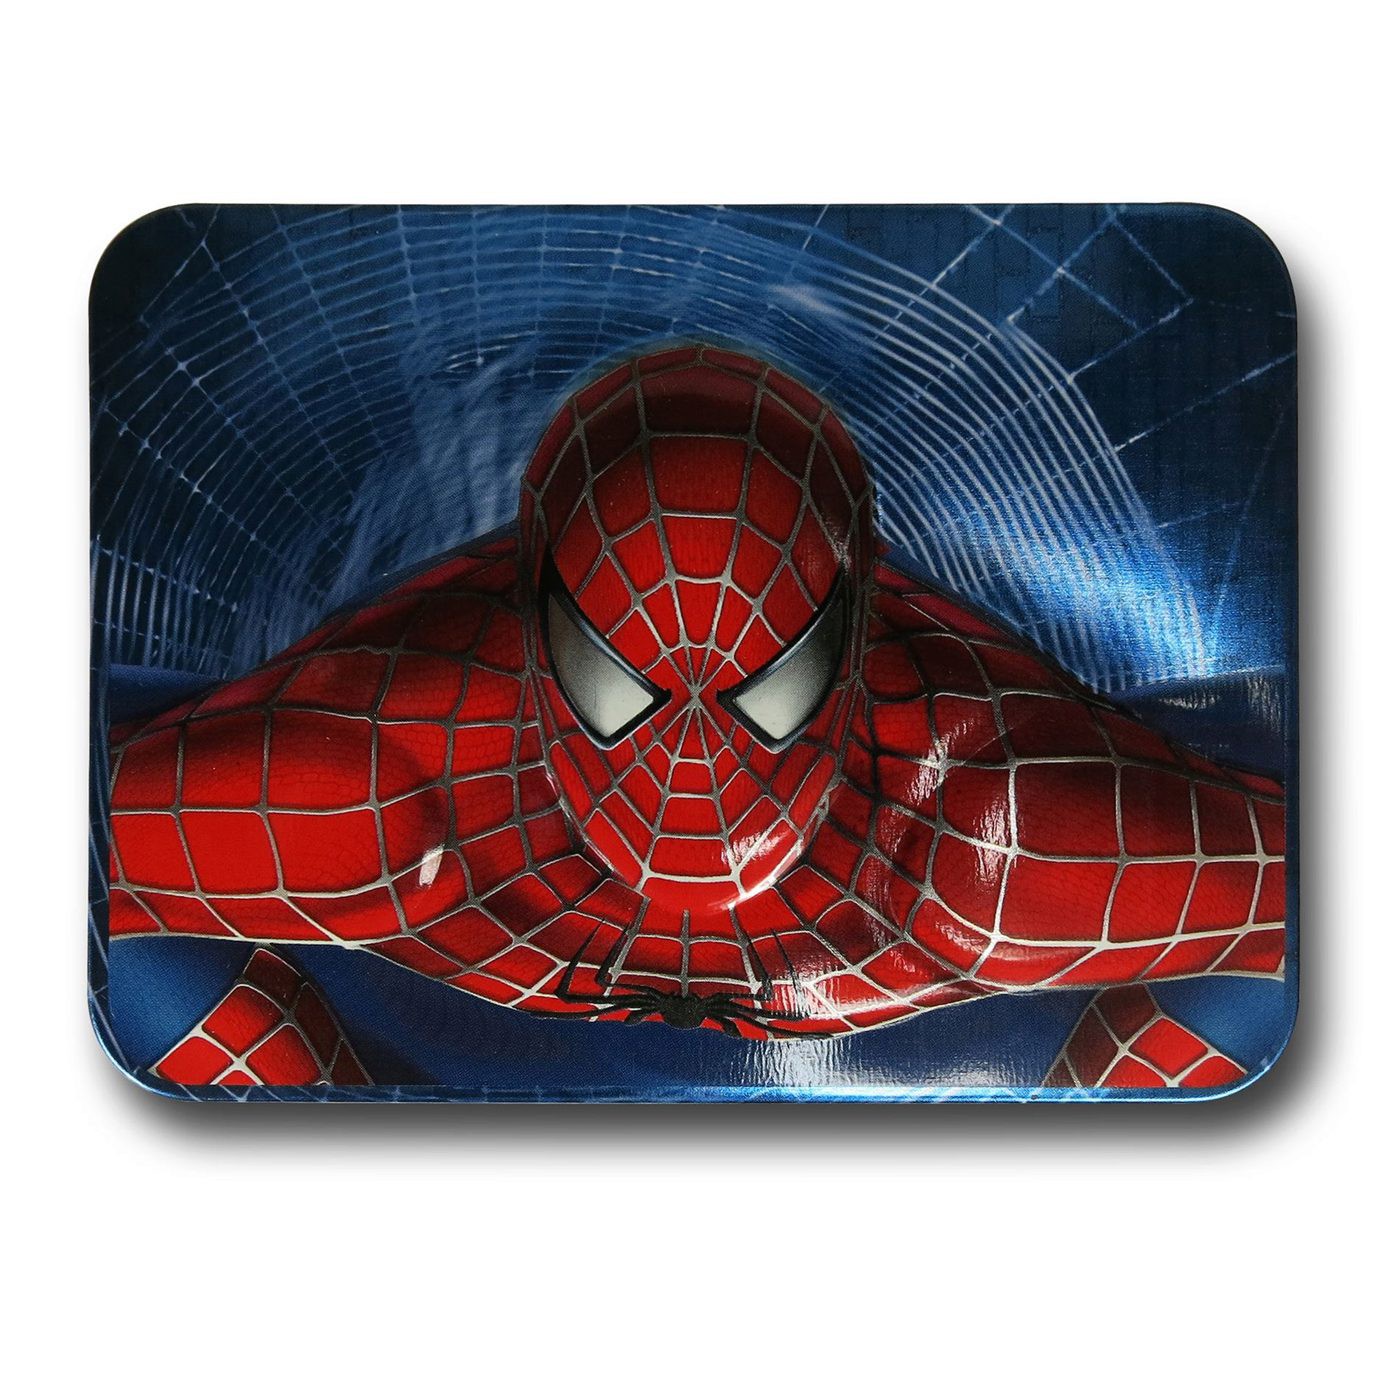 Spiderman 2 Playing Cards in Image Tin